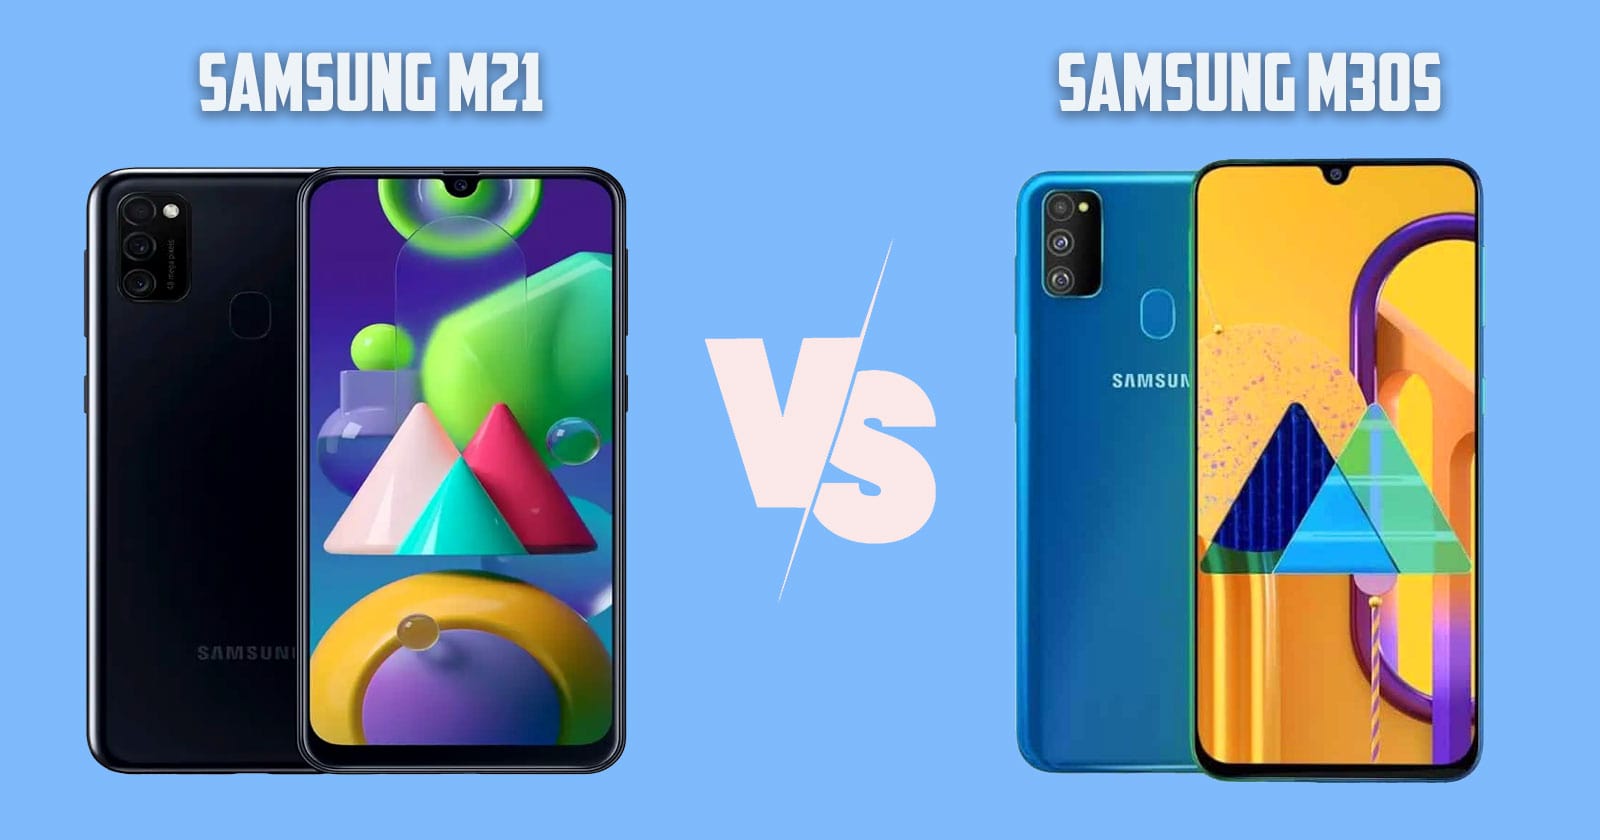 What is the difference between Samsung m21 and m30s?